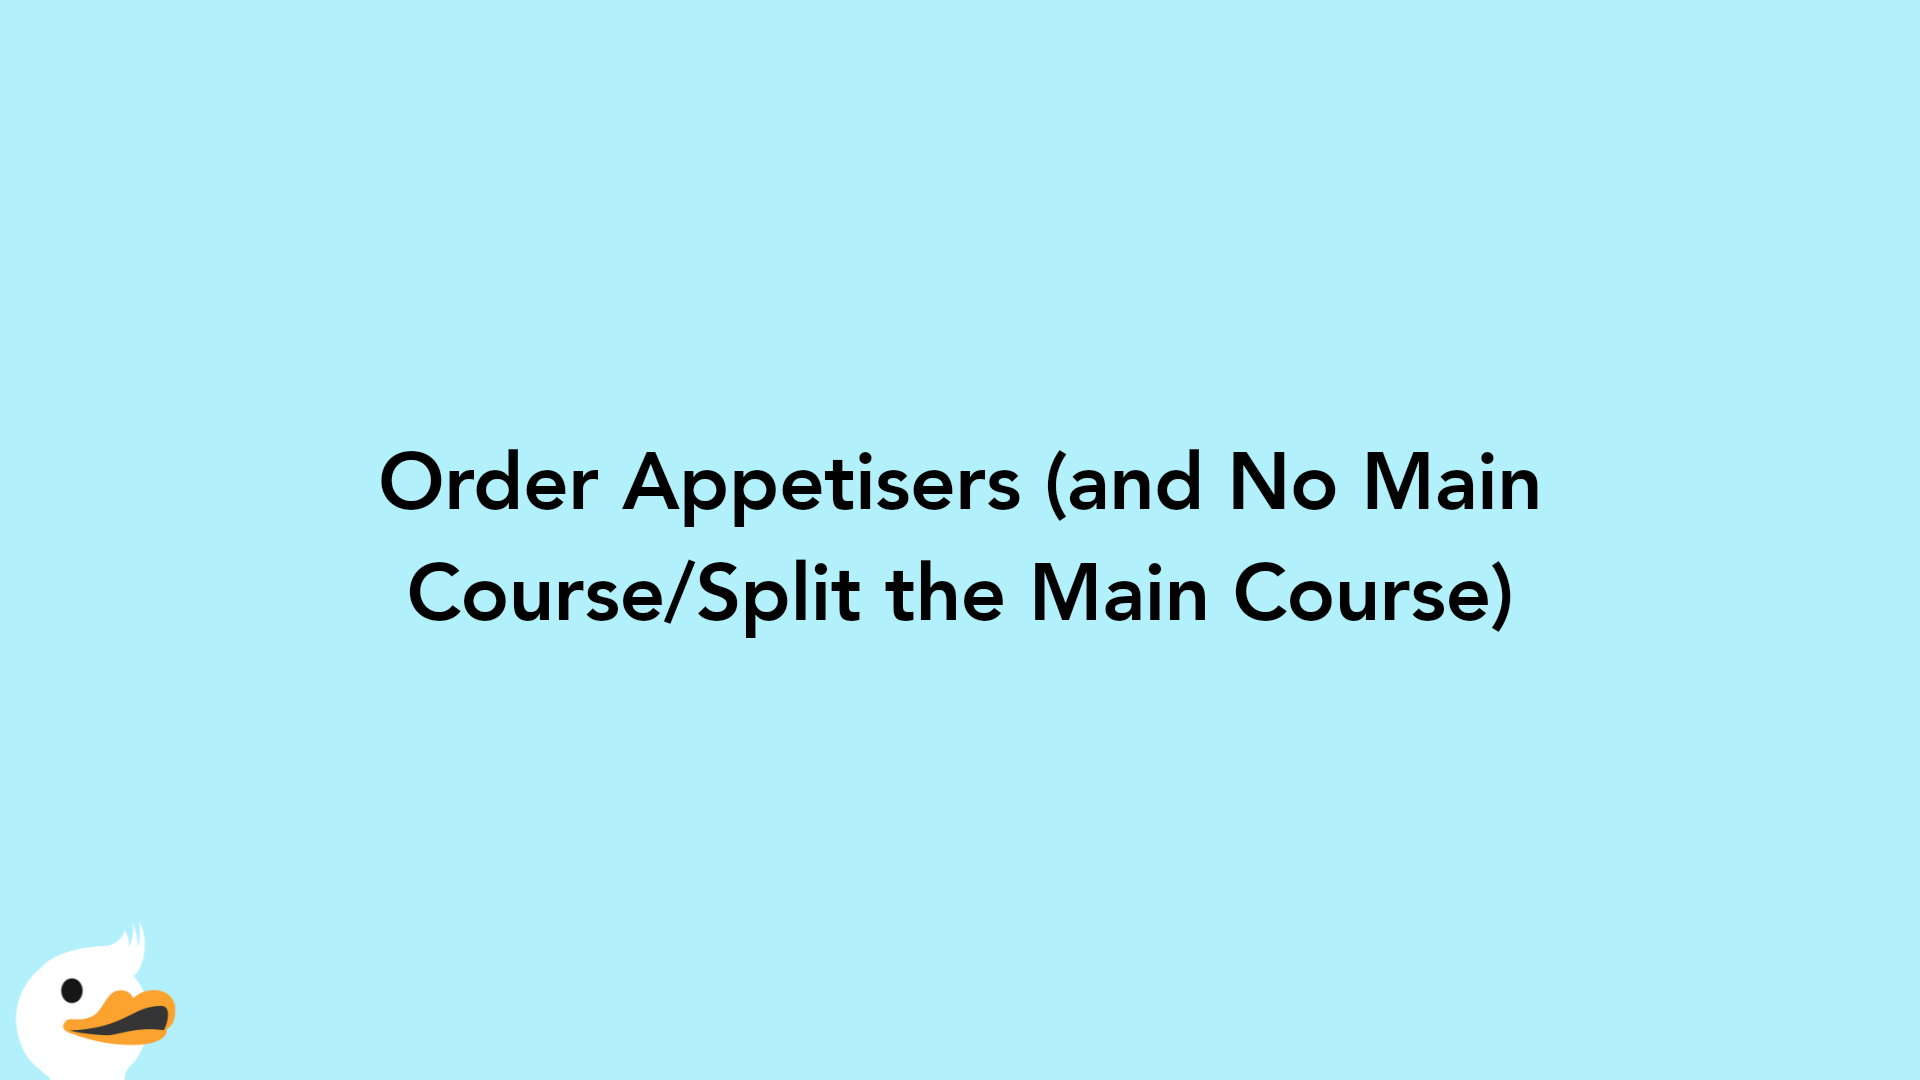 Order Appetisers (and No Main Course/Split the Main Course)